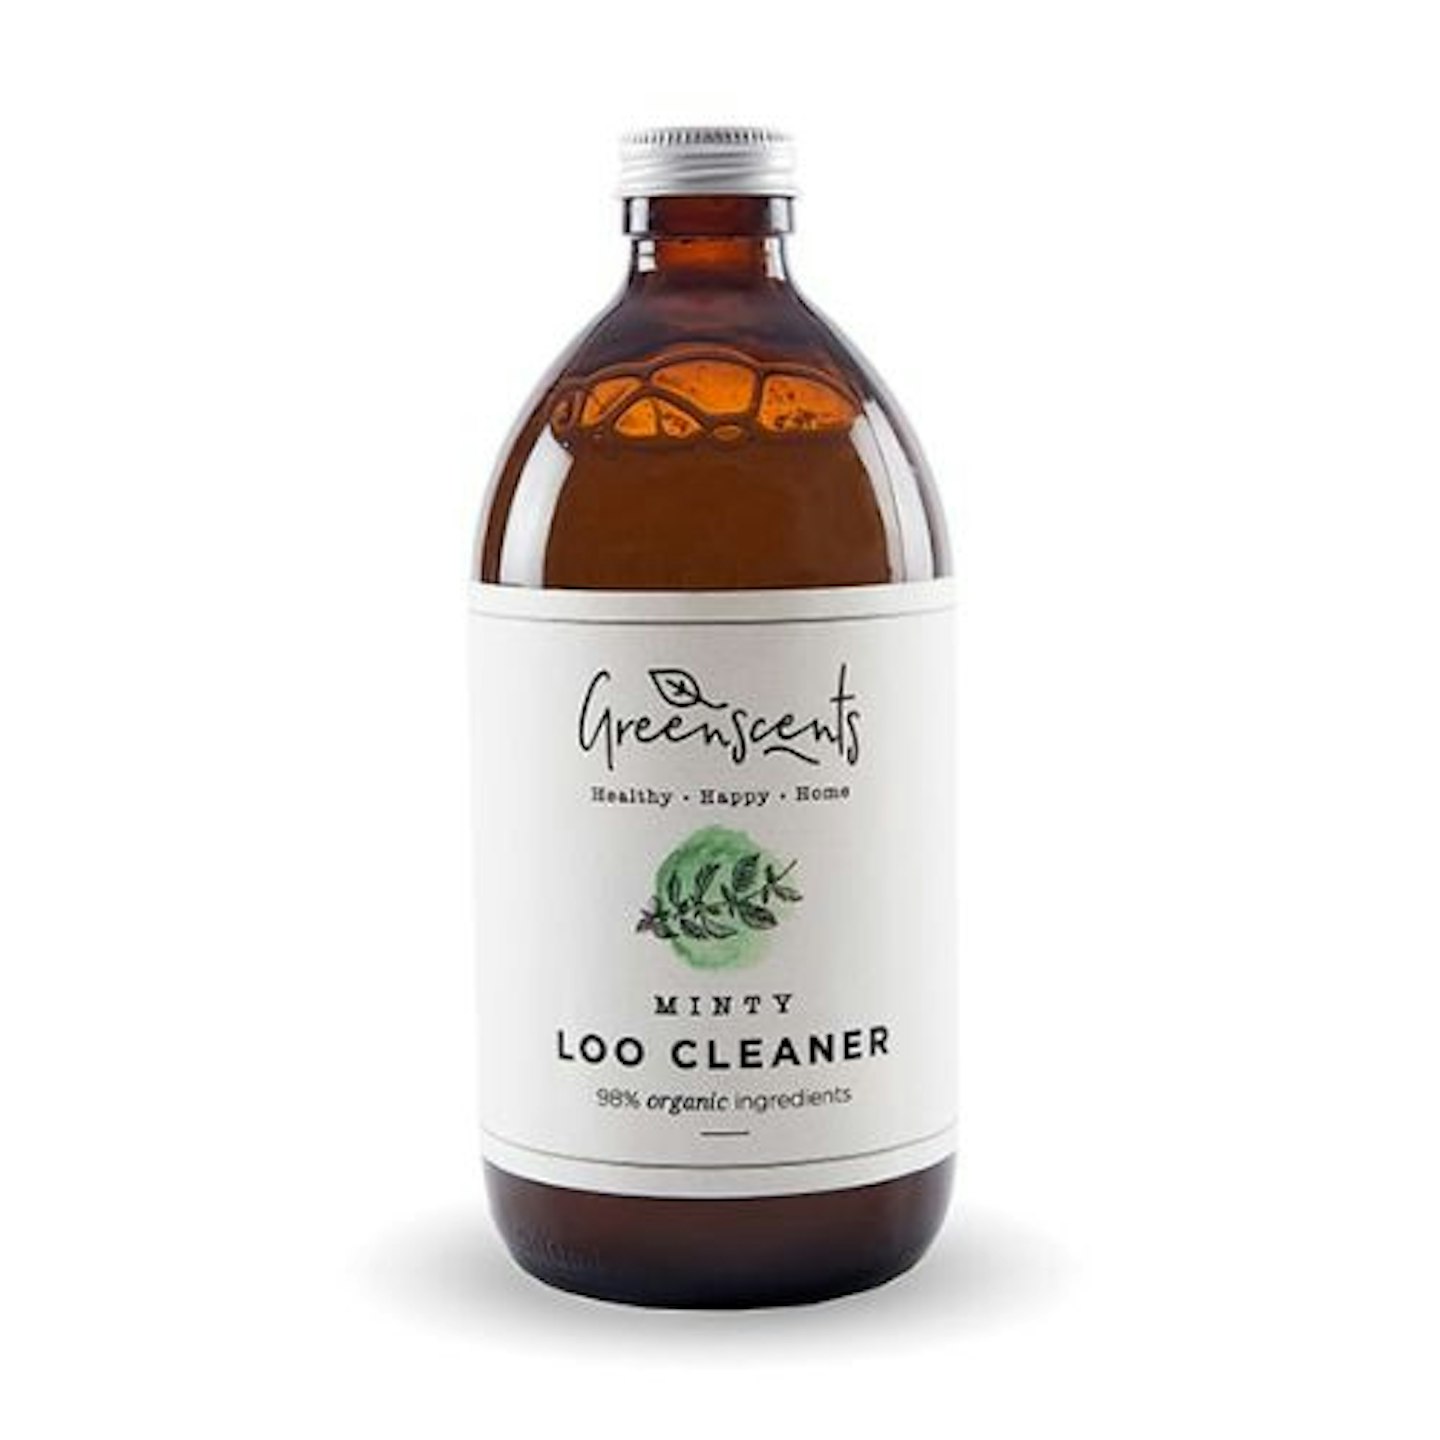 Greenscents, Minty Loo Cleaner